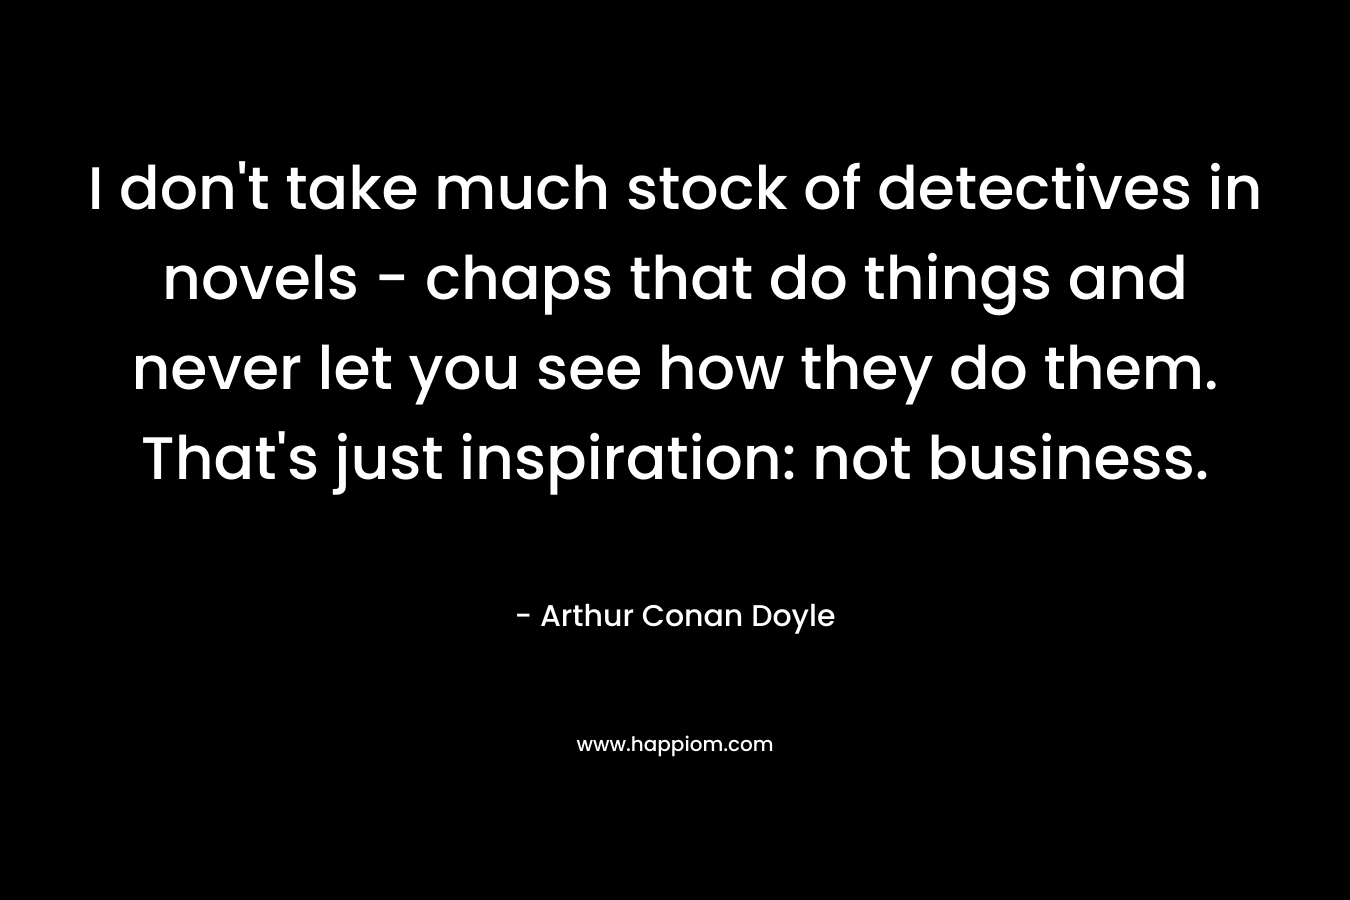 I don't take much stock of detectives in novels - chaps that do things and never let you see how they do them. That's just inspiration: not business.